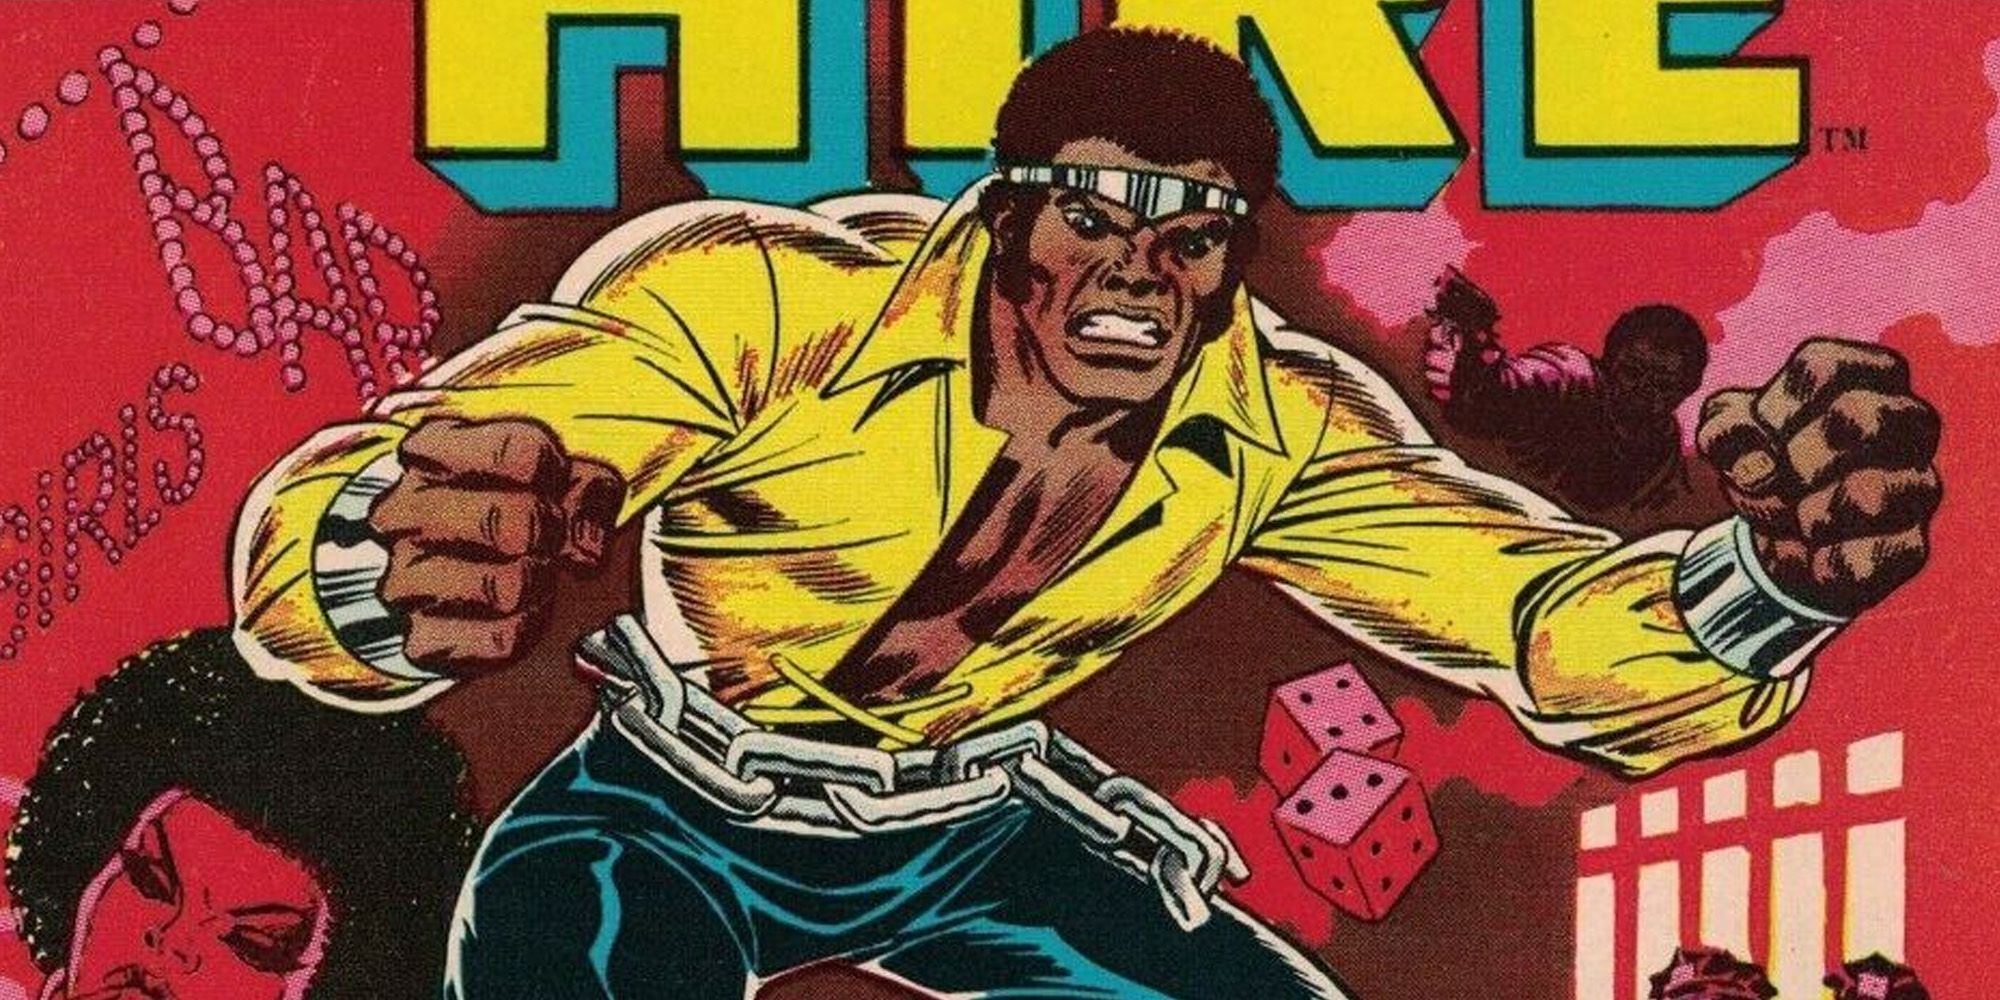 An image of Luke Cage about to fight someone in the Marvel Comics